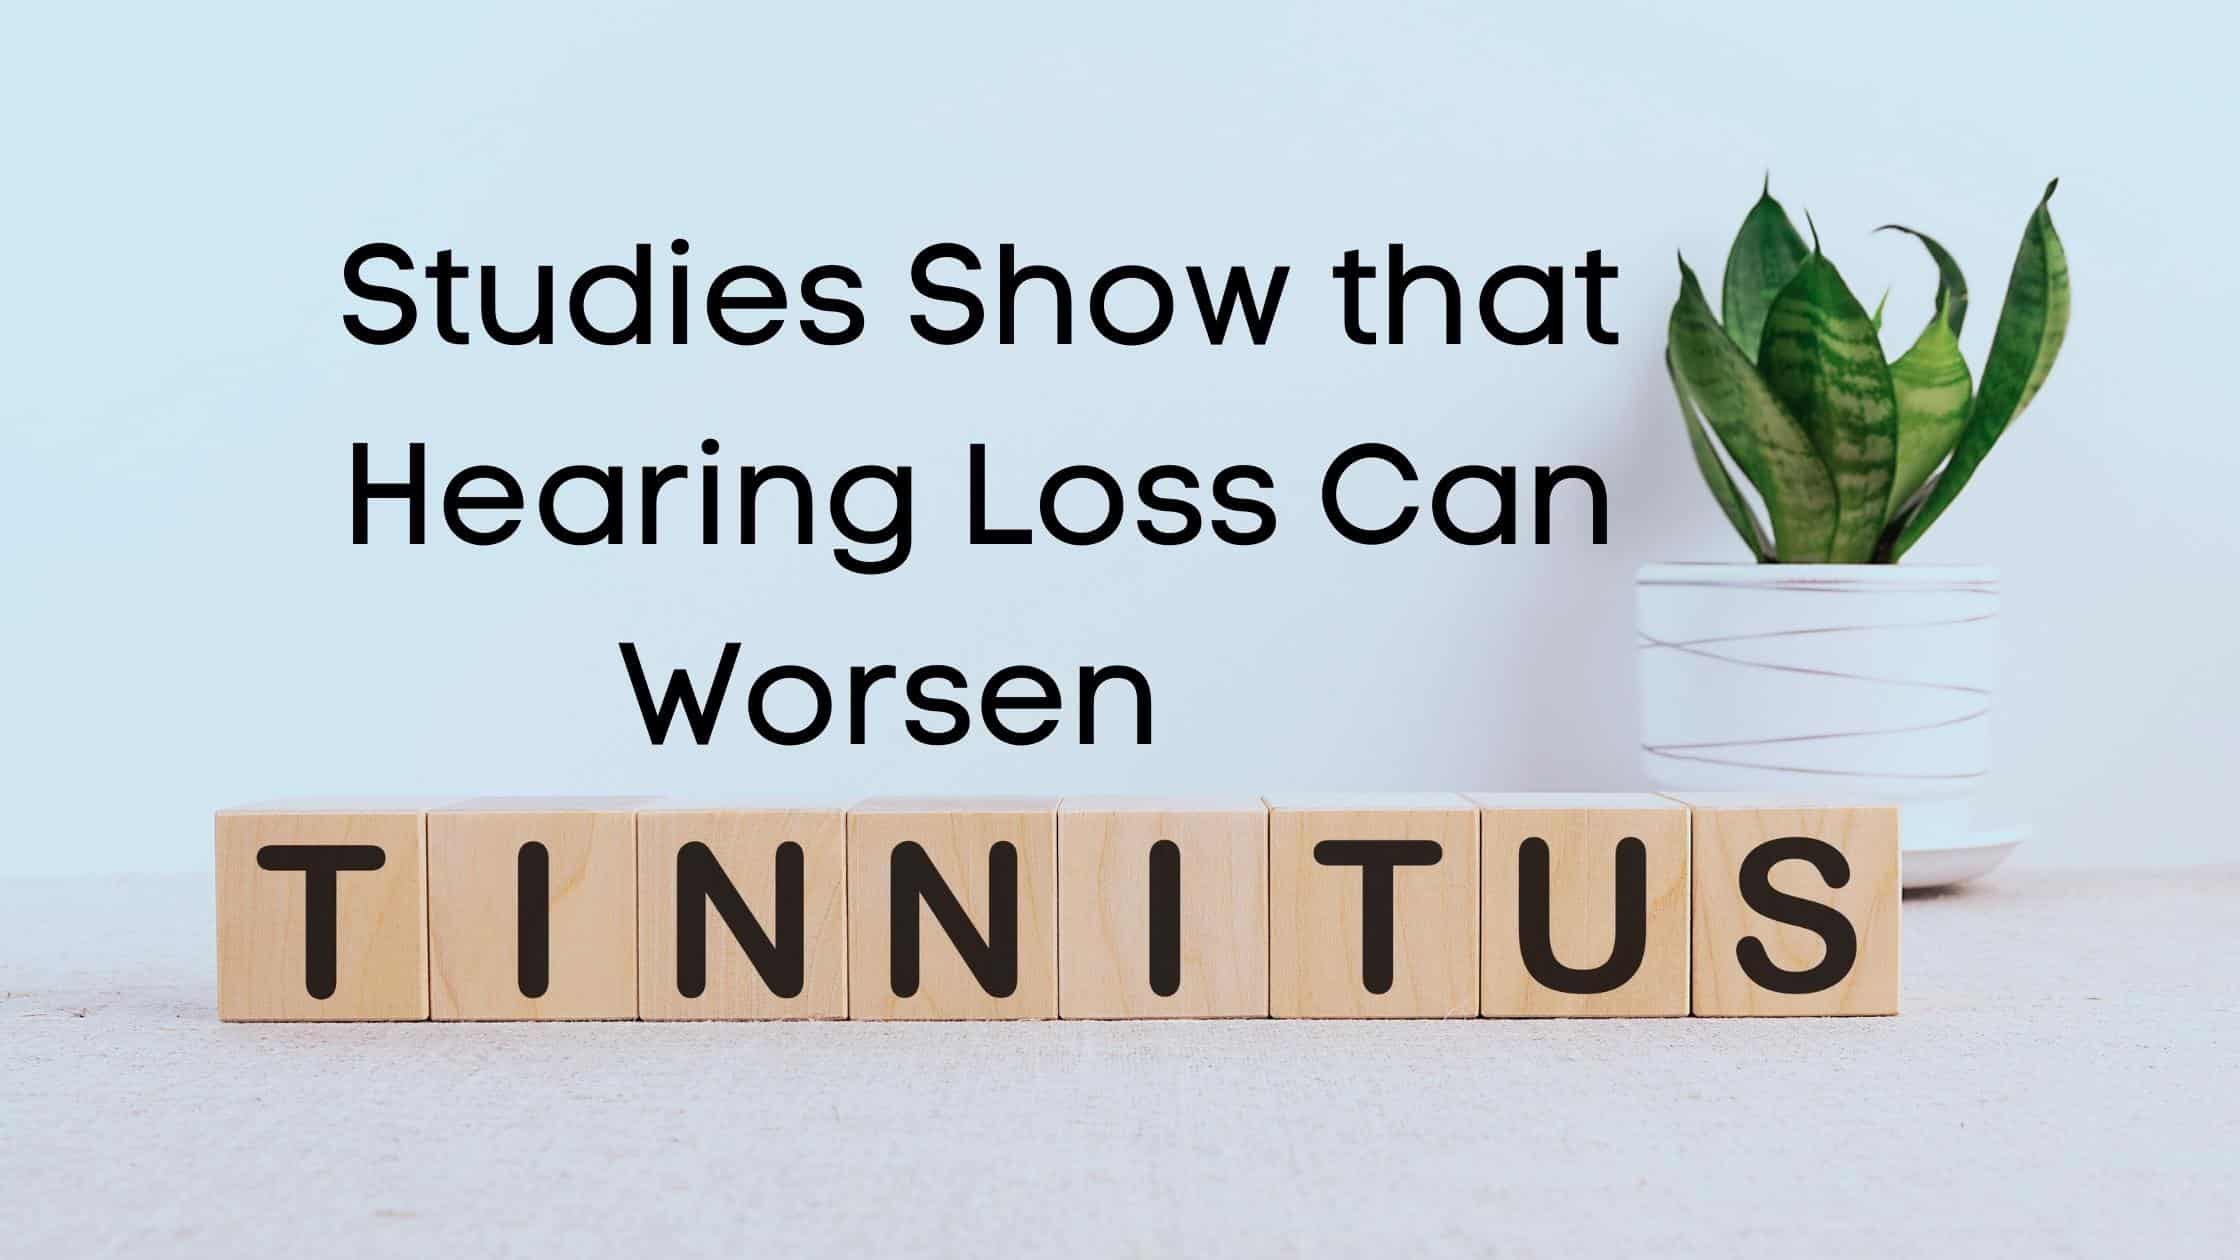 Featured image for “Studies Show that Hearing Loss Can Worsen Tinnitus”